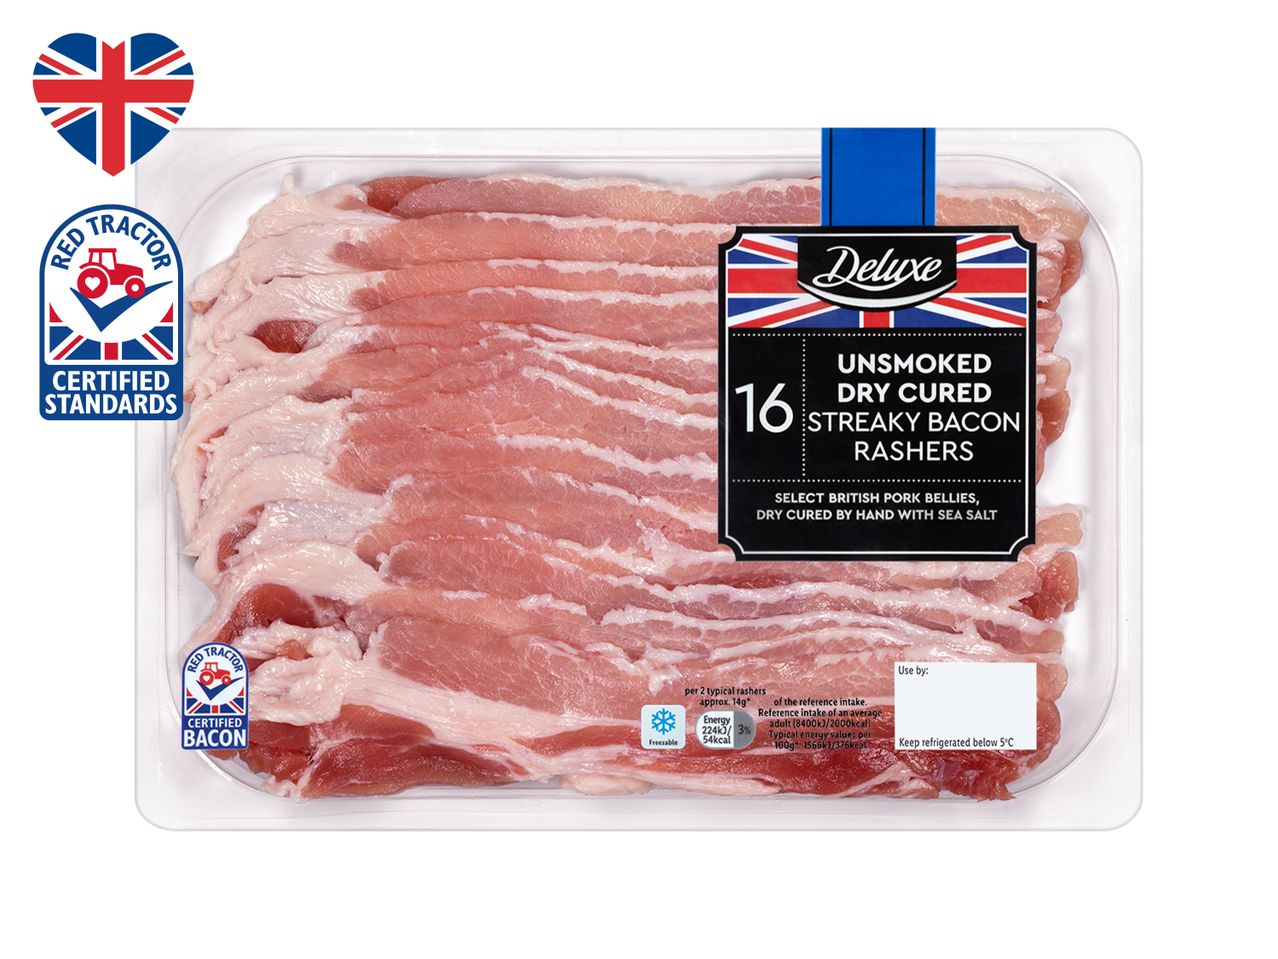 Go to full screen view: Deluxe RSPCA Dry Cured Streaky Bacon - Image 2